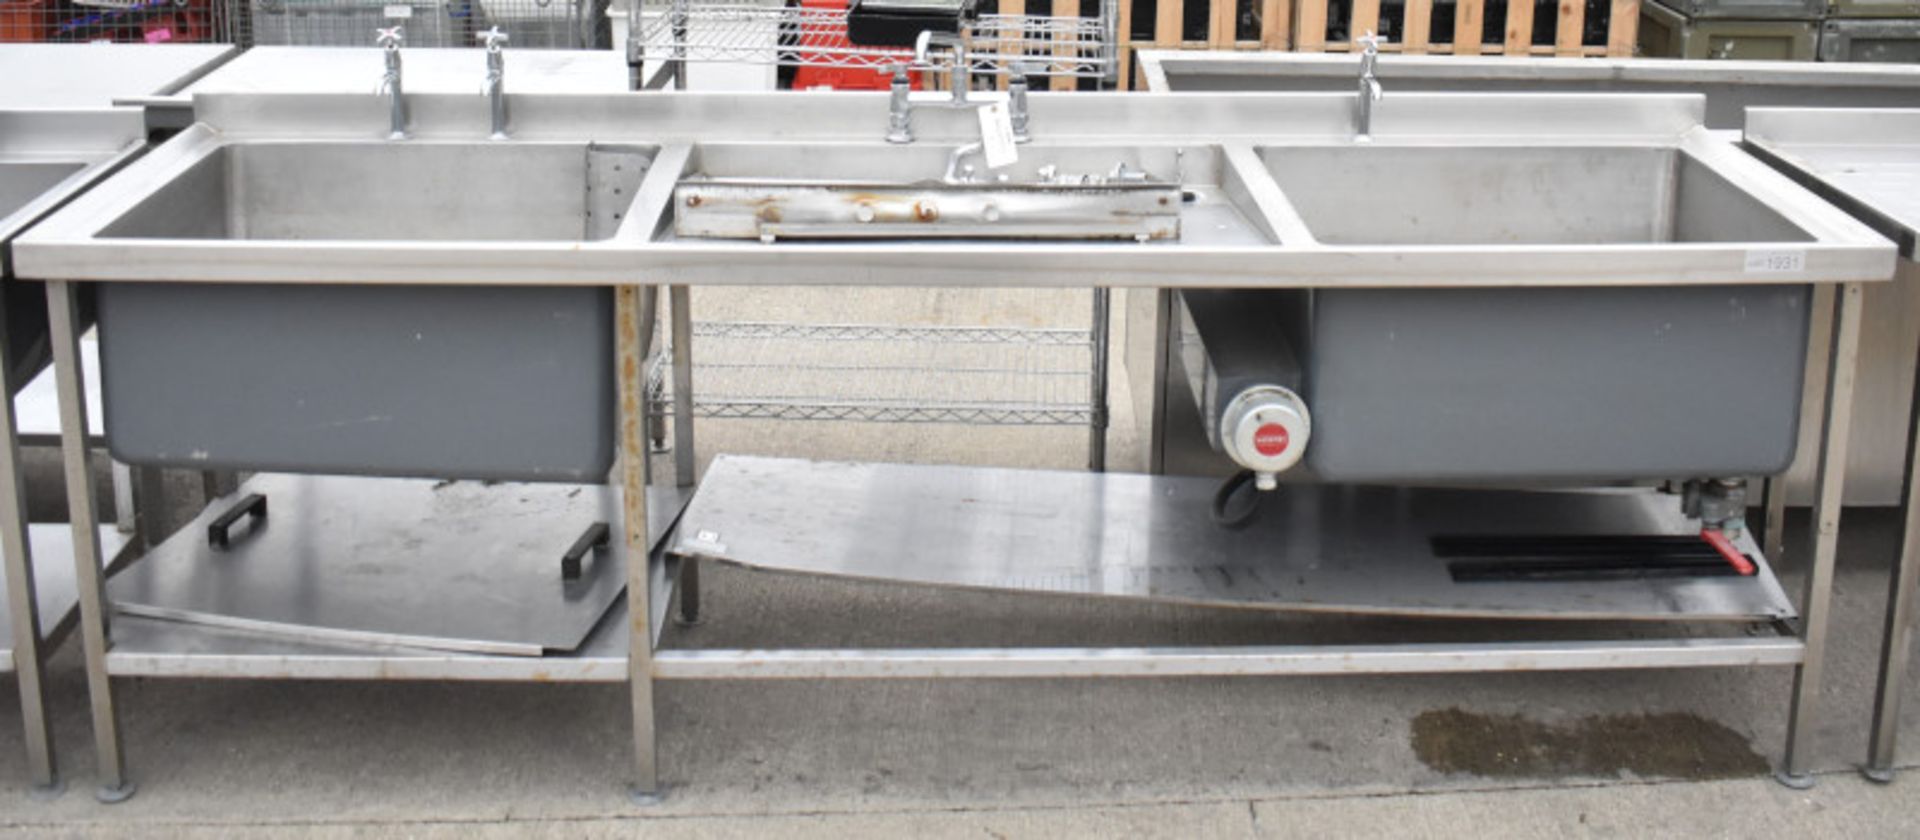 Stainless steel Double drainer Prep Sink Unit L 2700mm x D 750mm x H 950mm